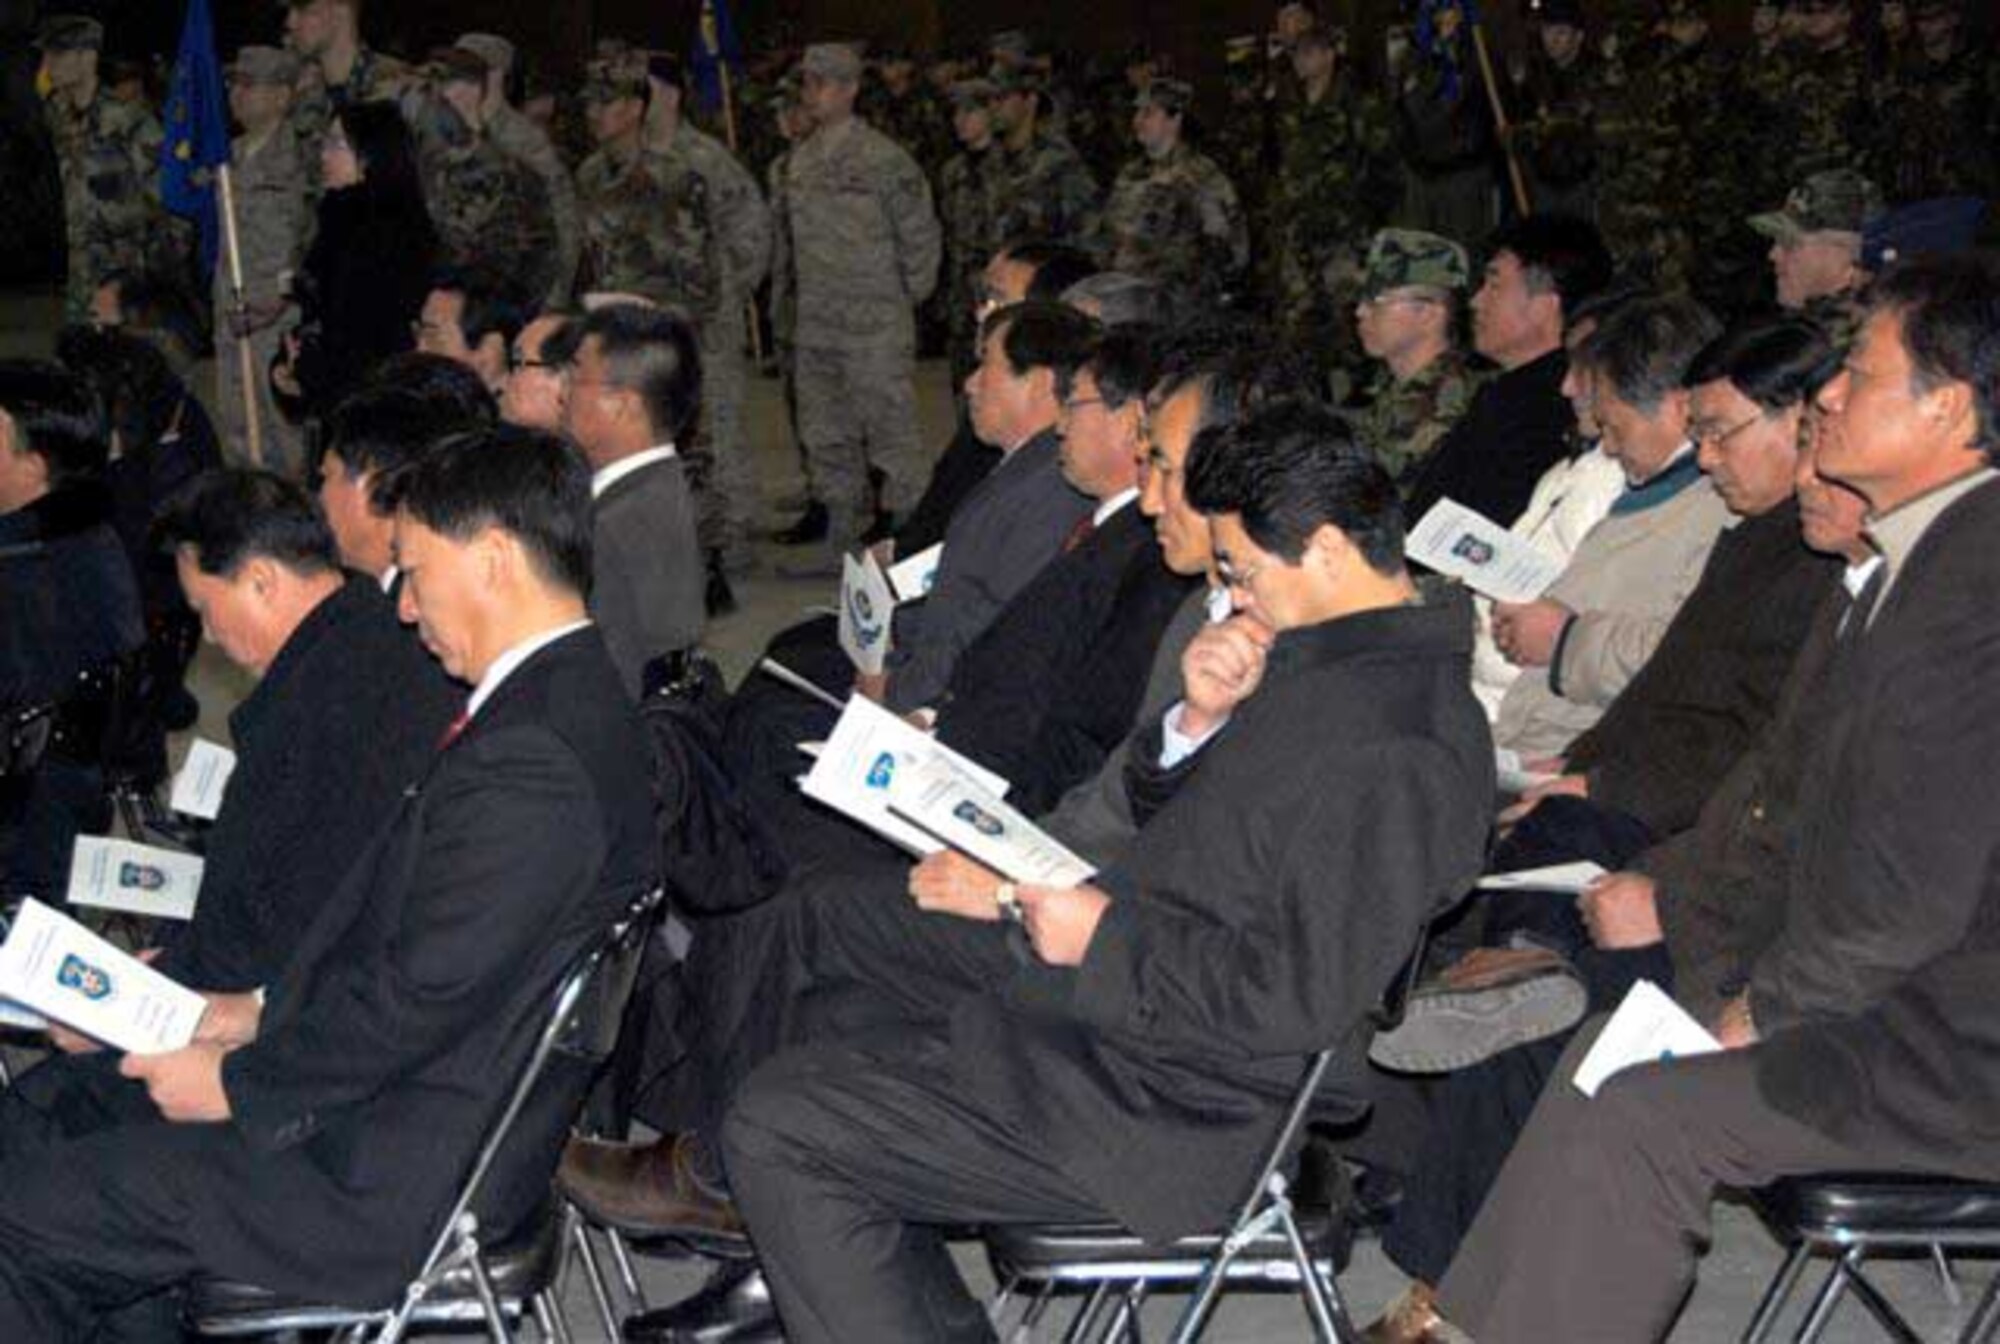 Honorary commanders listen to speakers during the Seventh Air Force’s Redesignation Ceremony Jan. 30. The new Seventh Air Force (Air Forces Korea) organization will provide the United States Forces Korea commander with critical air component capabilities, ensuring a key element of joint and combined operations on the Korean peninsula. (U.S. Air Force photo)